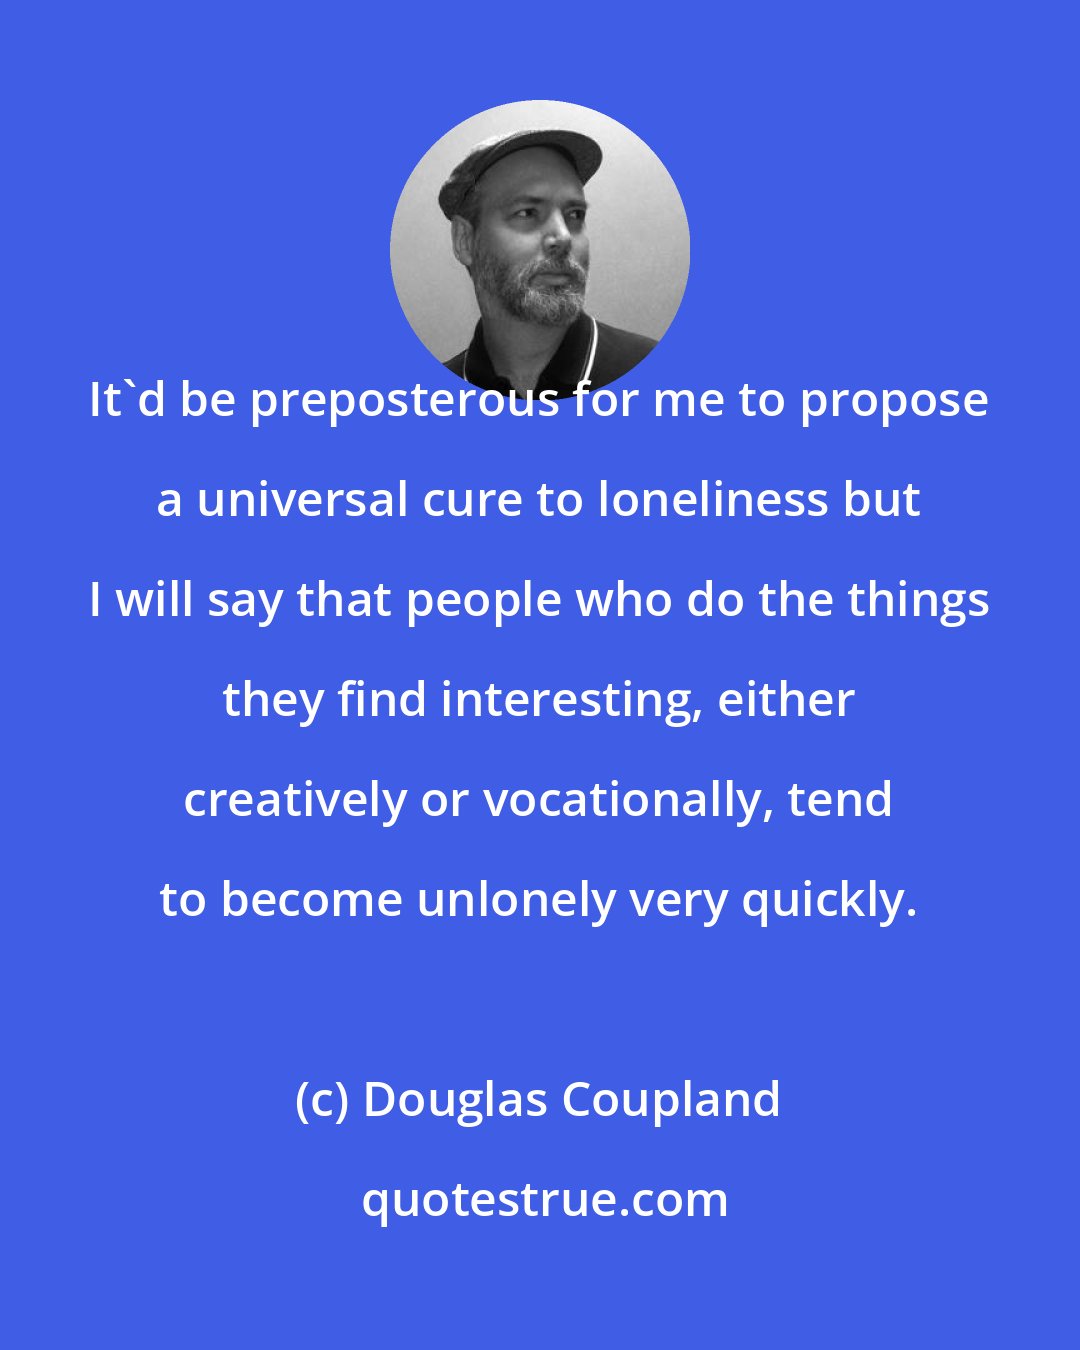 Douglas Coupland: It'd be preposterous for me to propose a universal cure to loneliness but I will say that people who do the things they find interesting, either creatively or vocationally, tend to become unlonely very quickly.